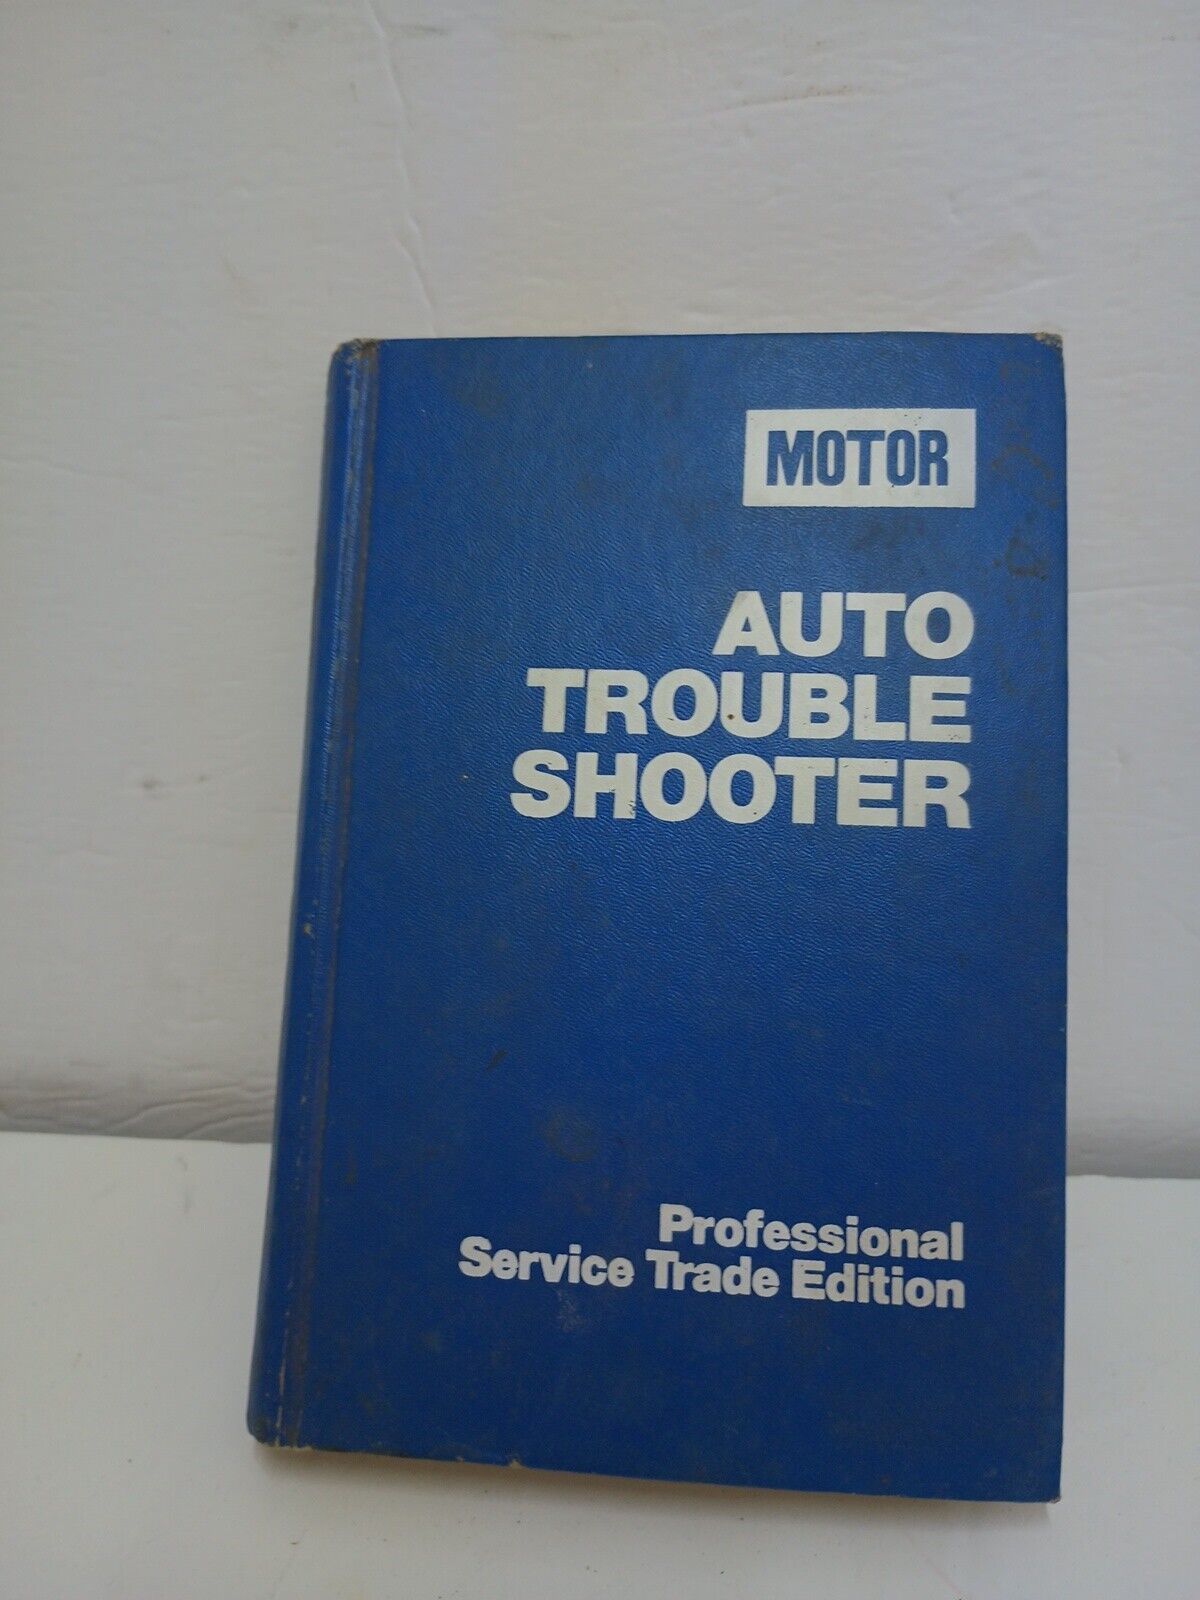 Motor Auto Trouble Shooter Professional Service Trade Edition 11th Edition Book